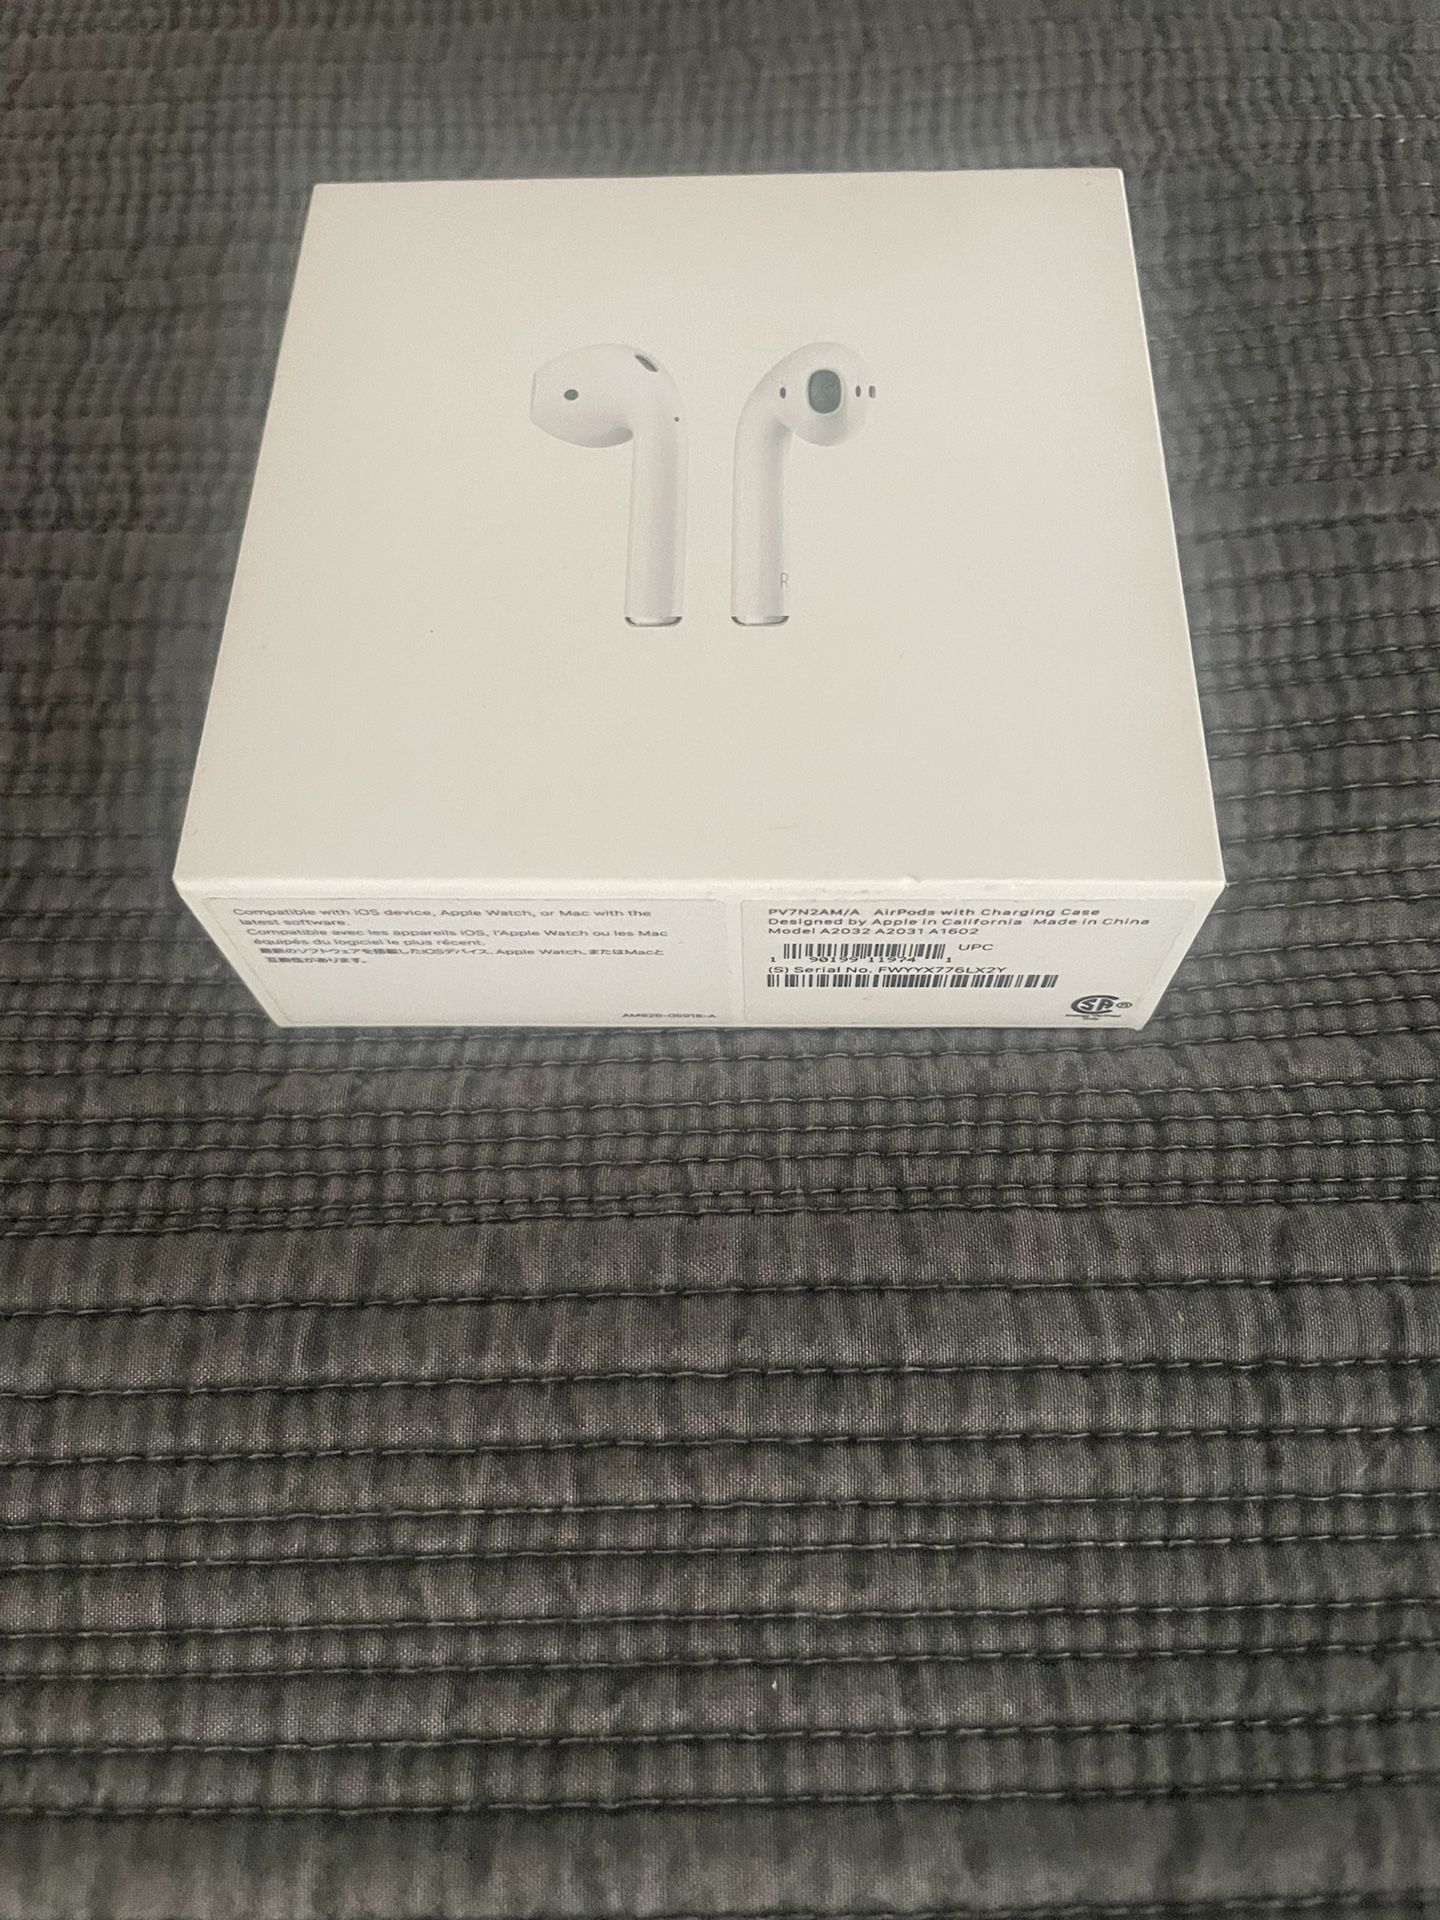 AirPods Gen 2. —in The Box(used)— Make Offer 